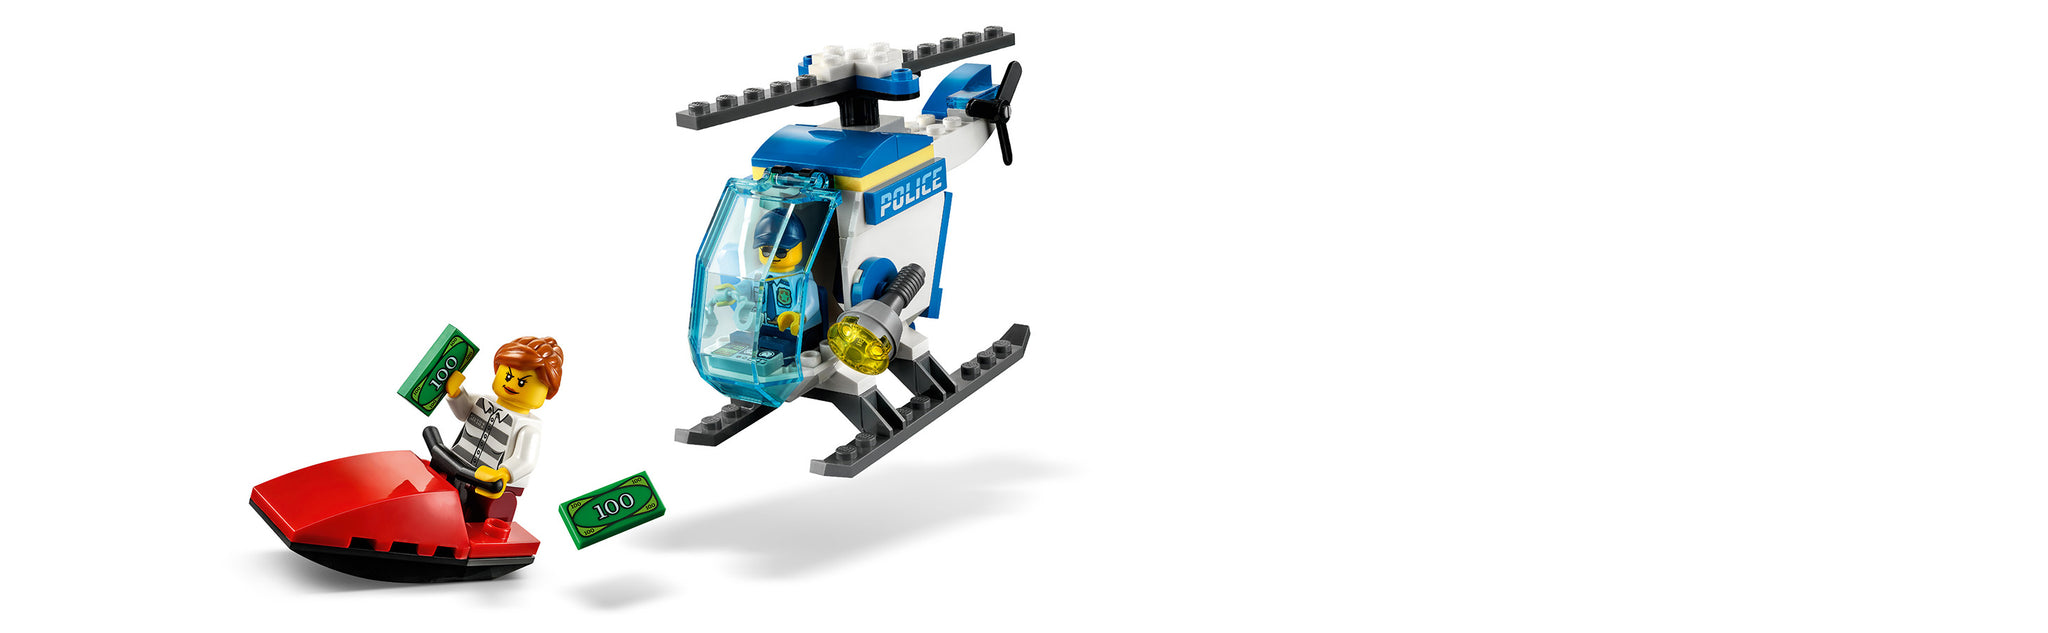 LEGO 60275 Police Helicopter with crooks